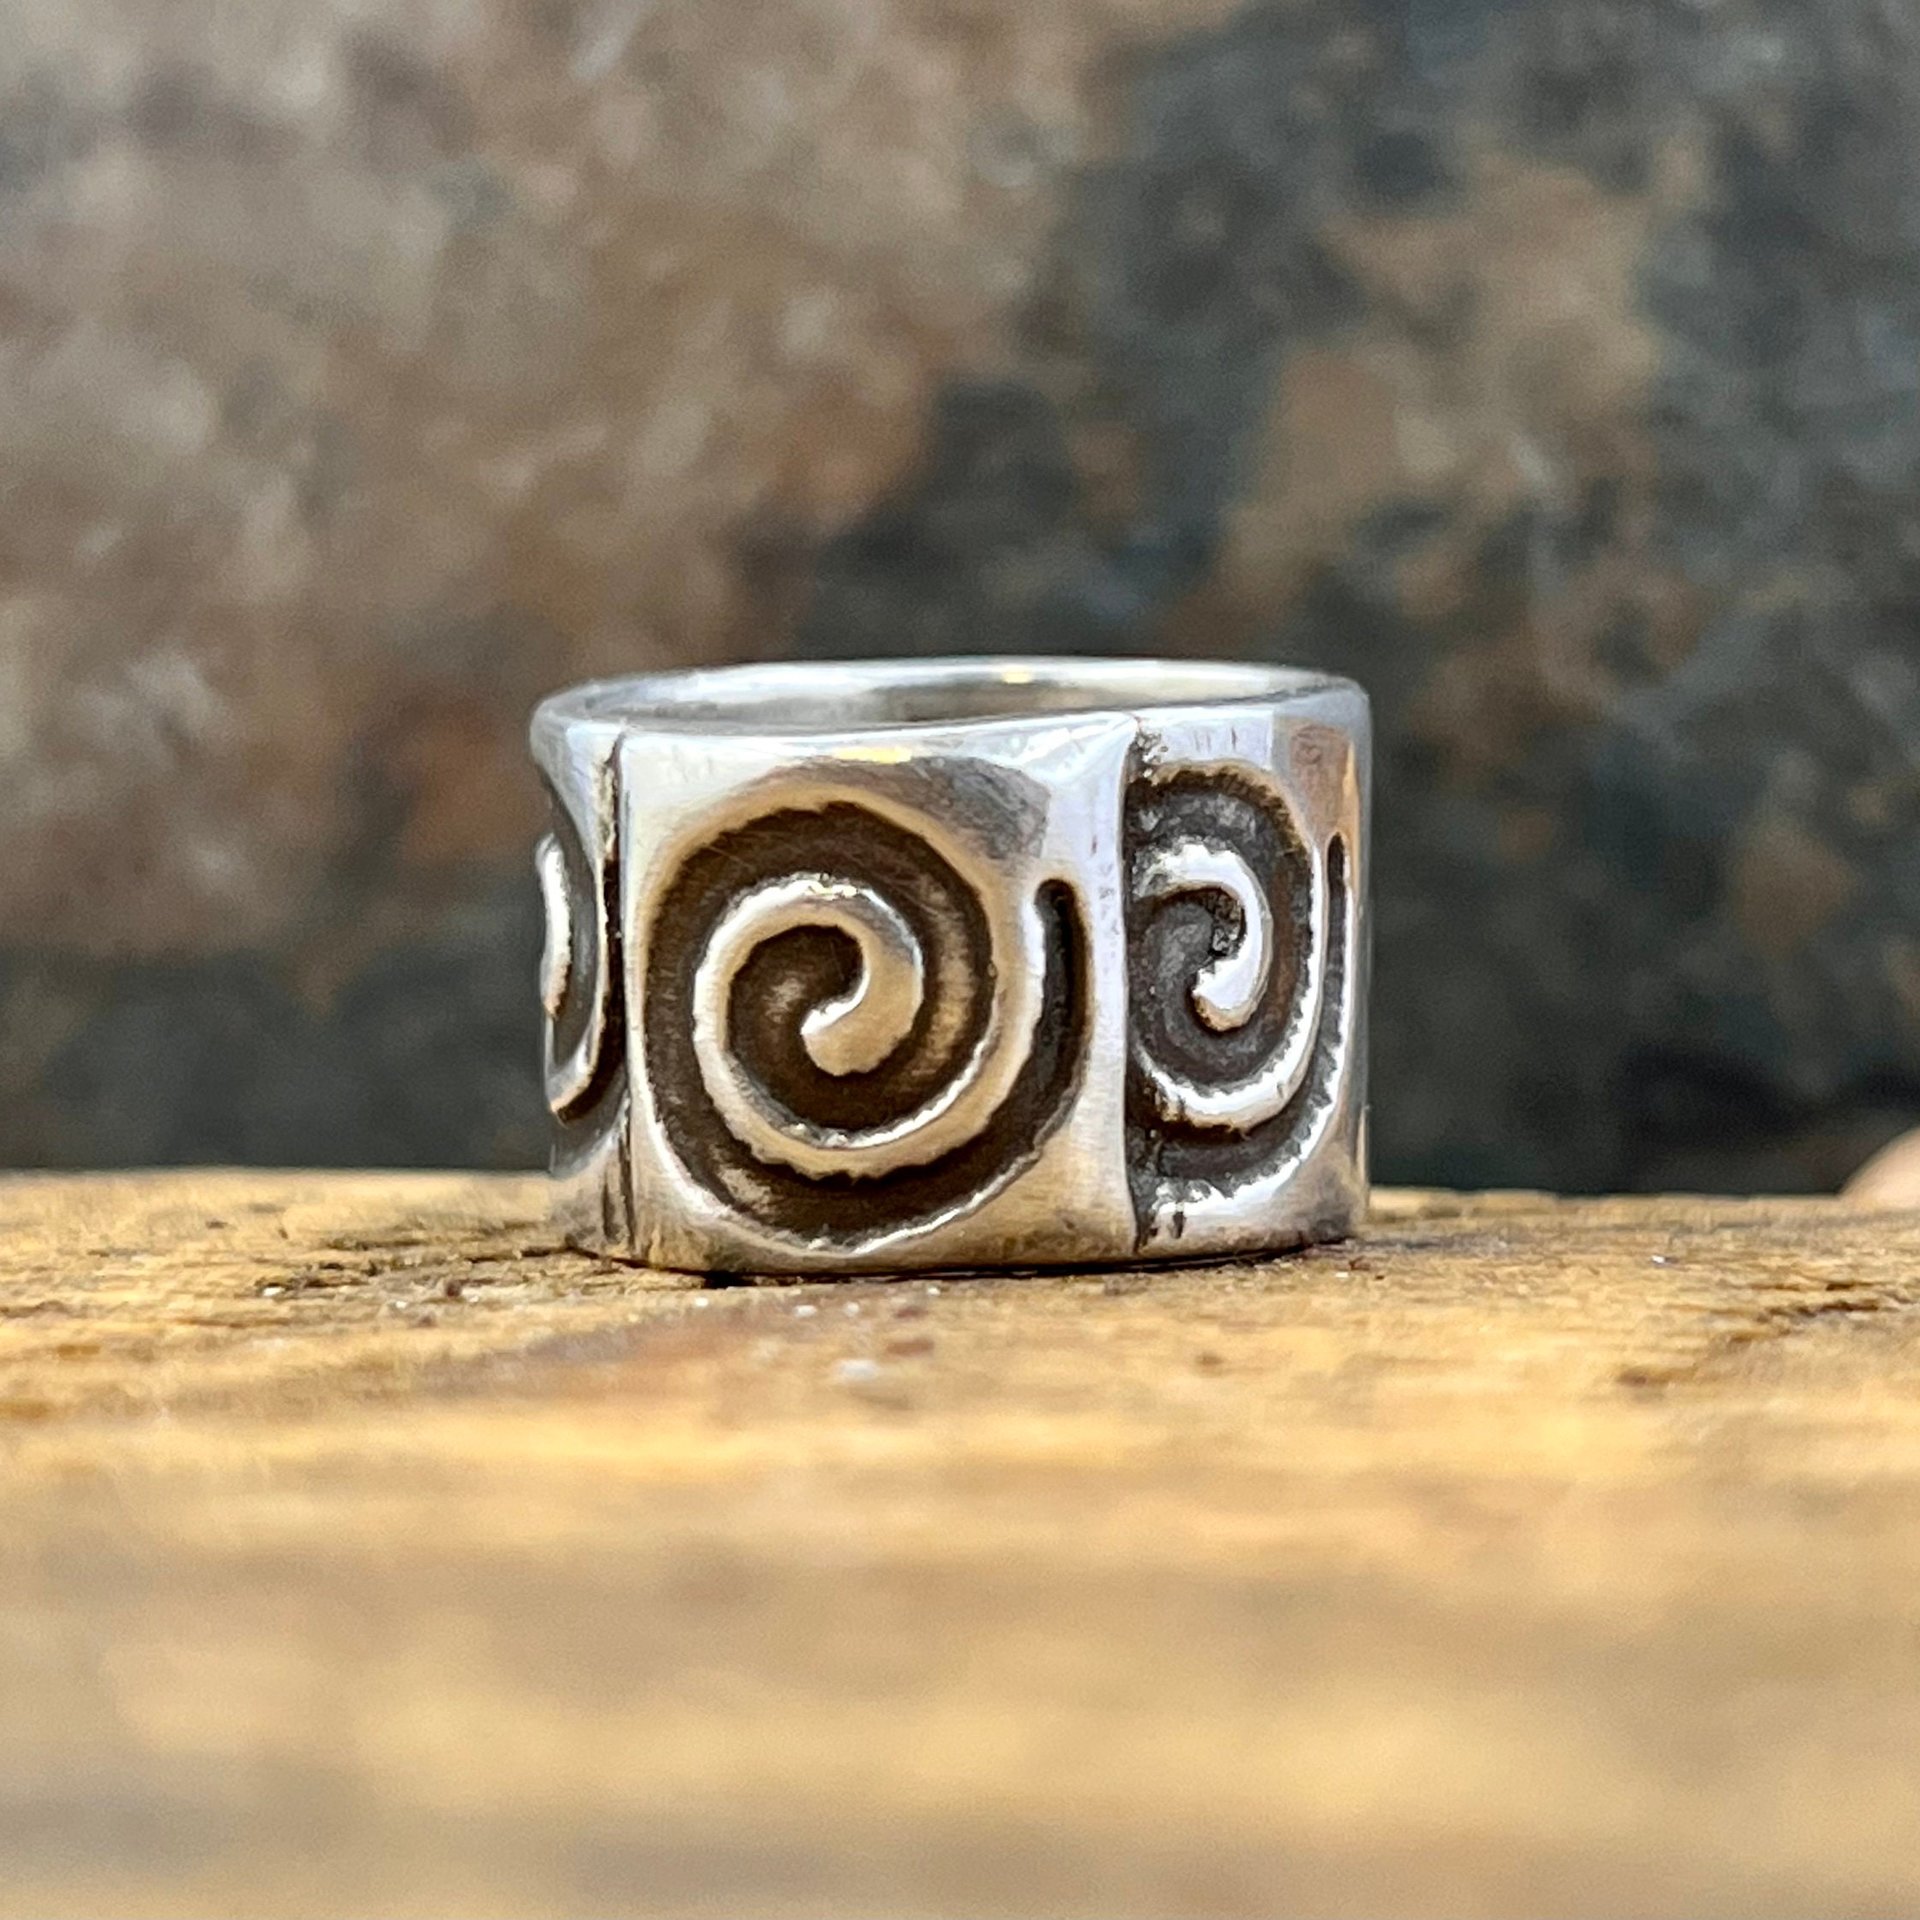 Silver Spiral Ring, Sterling Silver 960, Irish Celtic Jewelry, Wide Band Rings, Earthy Art Jewelry, Single Spirals, Sun Symbol,